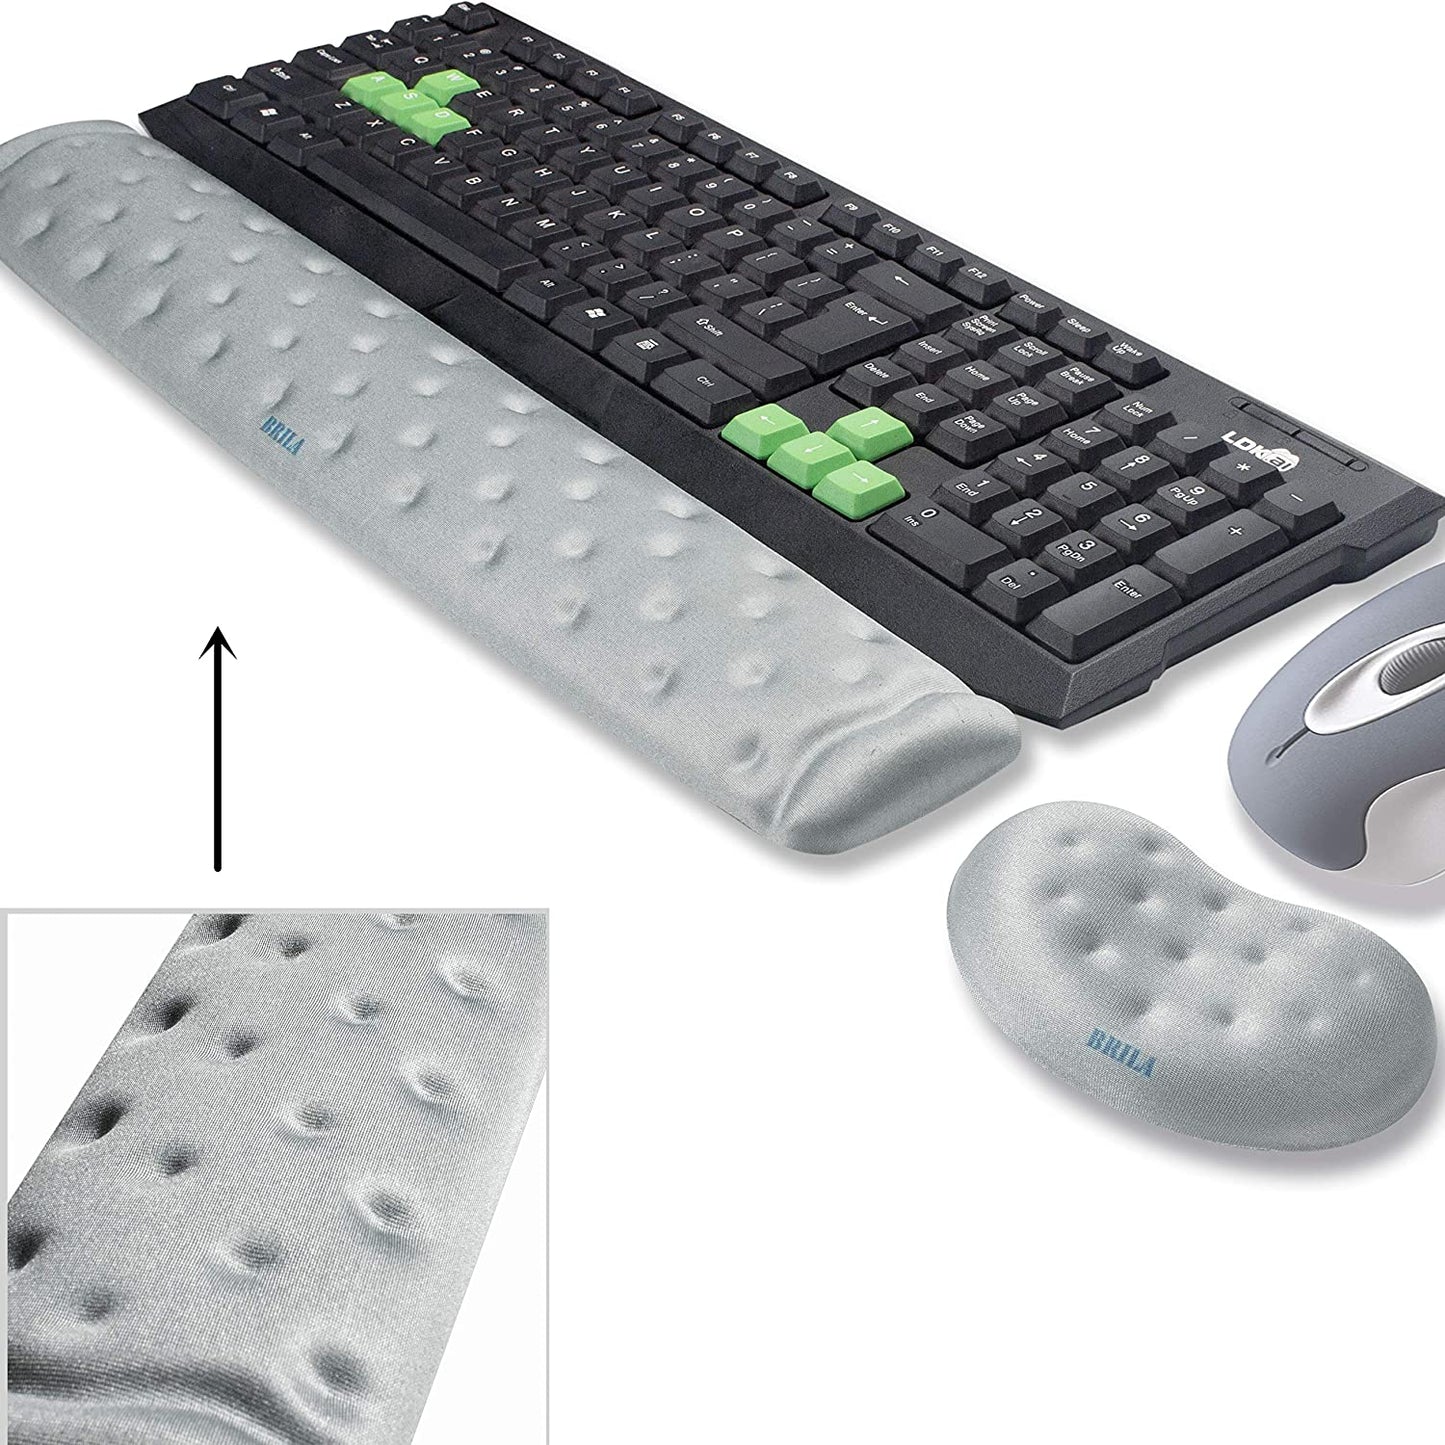 BRILA Memory Foam Mouse & Keyboard Wrist Rest Support Pad Cushion Set for Computer, Laptop, Office Work, PC Gaming - Massage Holes Design - Easy Typing Wrist Pain Relief